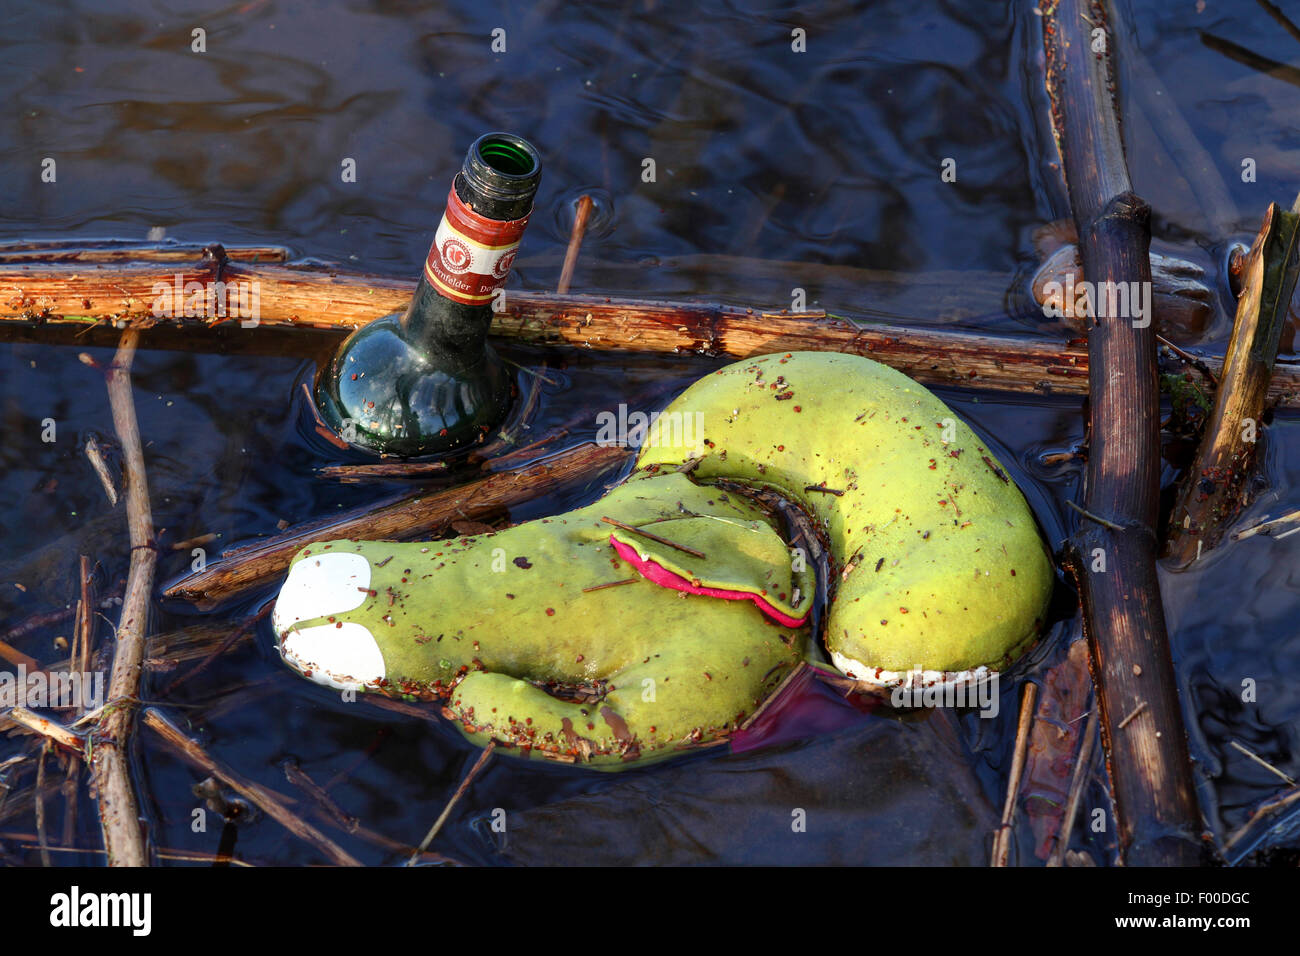 waste floating on the water, Germany Stock Photo